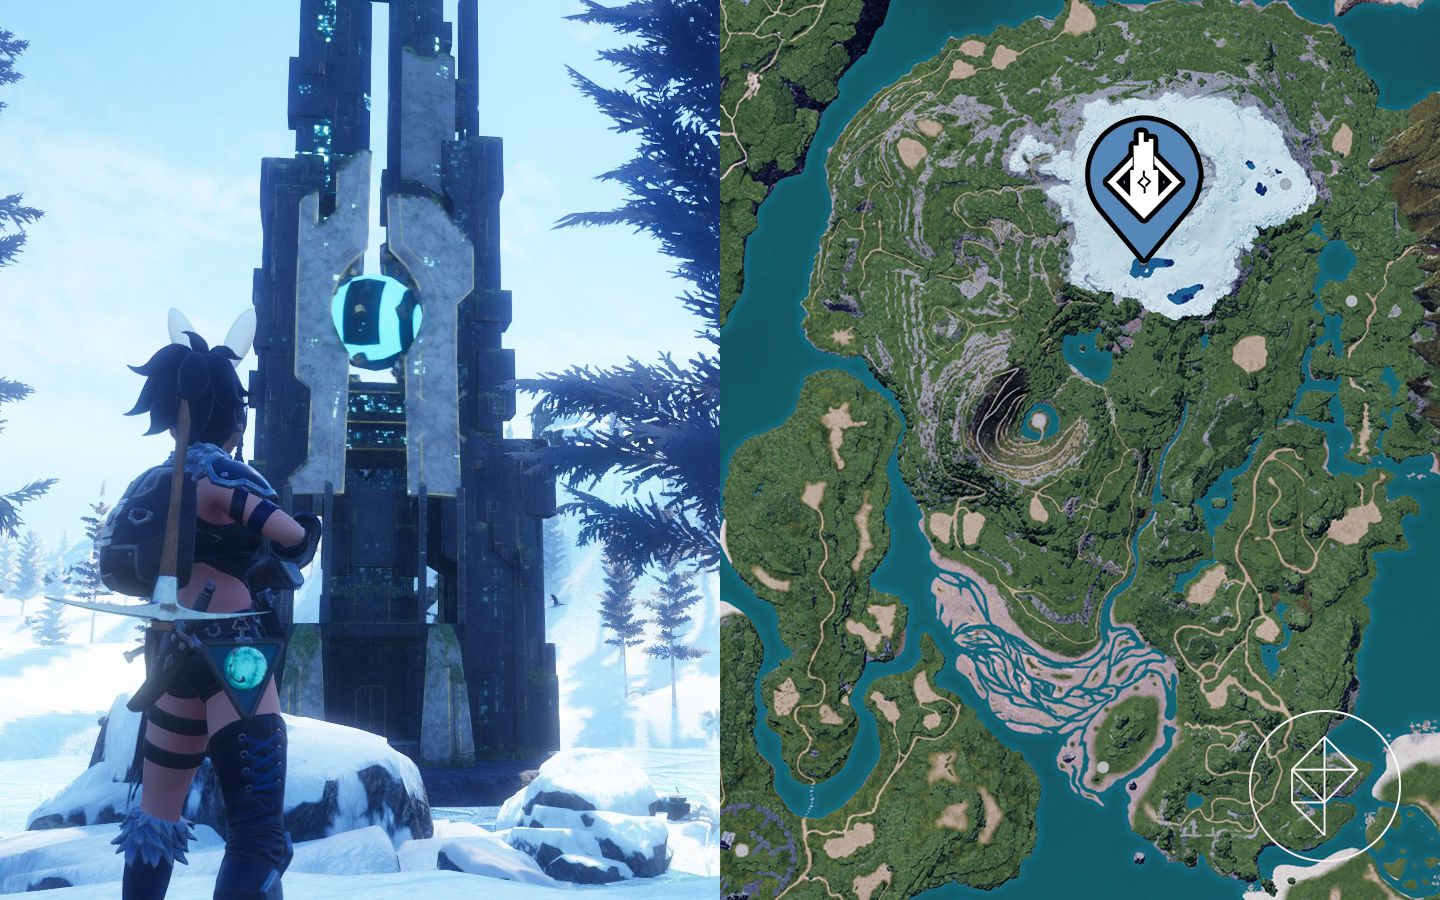 A Palworld stands in front of the tower in the snow with a map showing where it is.